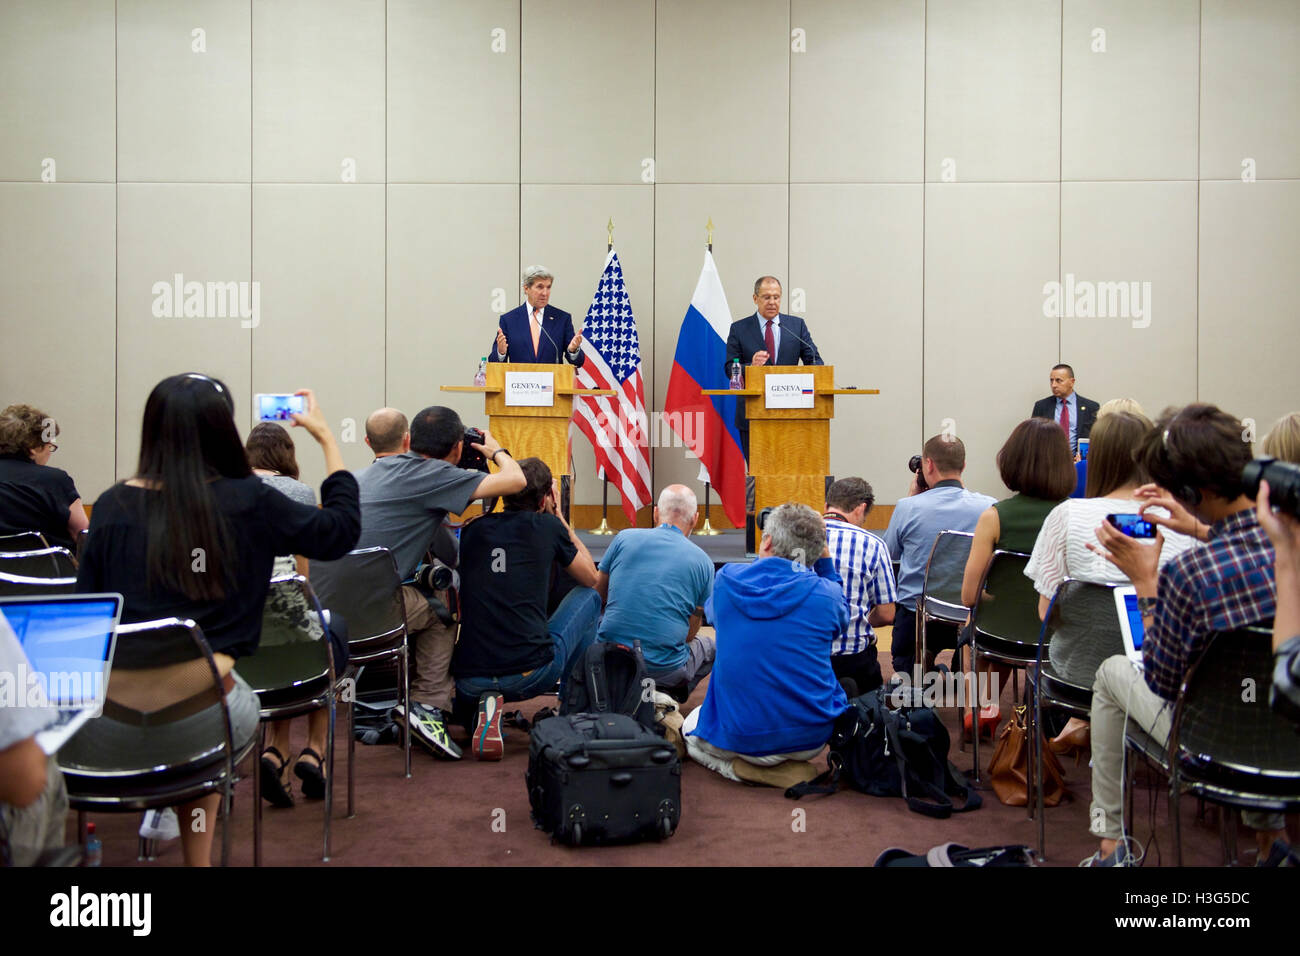 U.S. Secretary of State John Kerry speaks as he and Russian Foreign Minister Sergey Lavrov address reporters during a joint news conference following a bilateral meeting focused on Syria held August 26, 2016, at the President Wilson Hotel in Geneva, Switzerland. Stock Photo